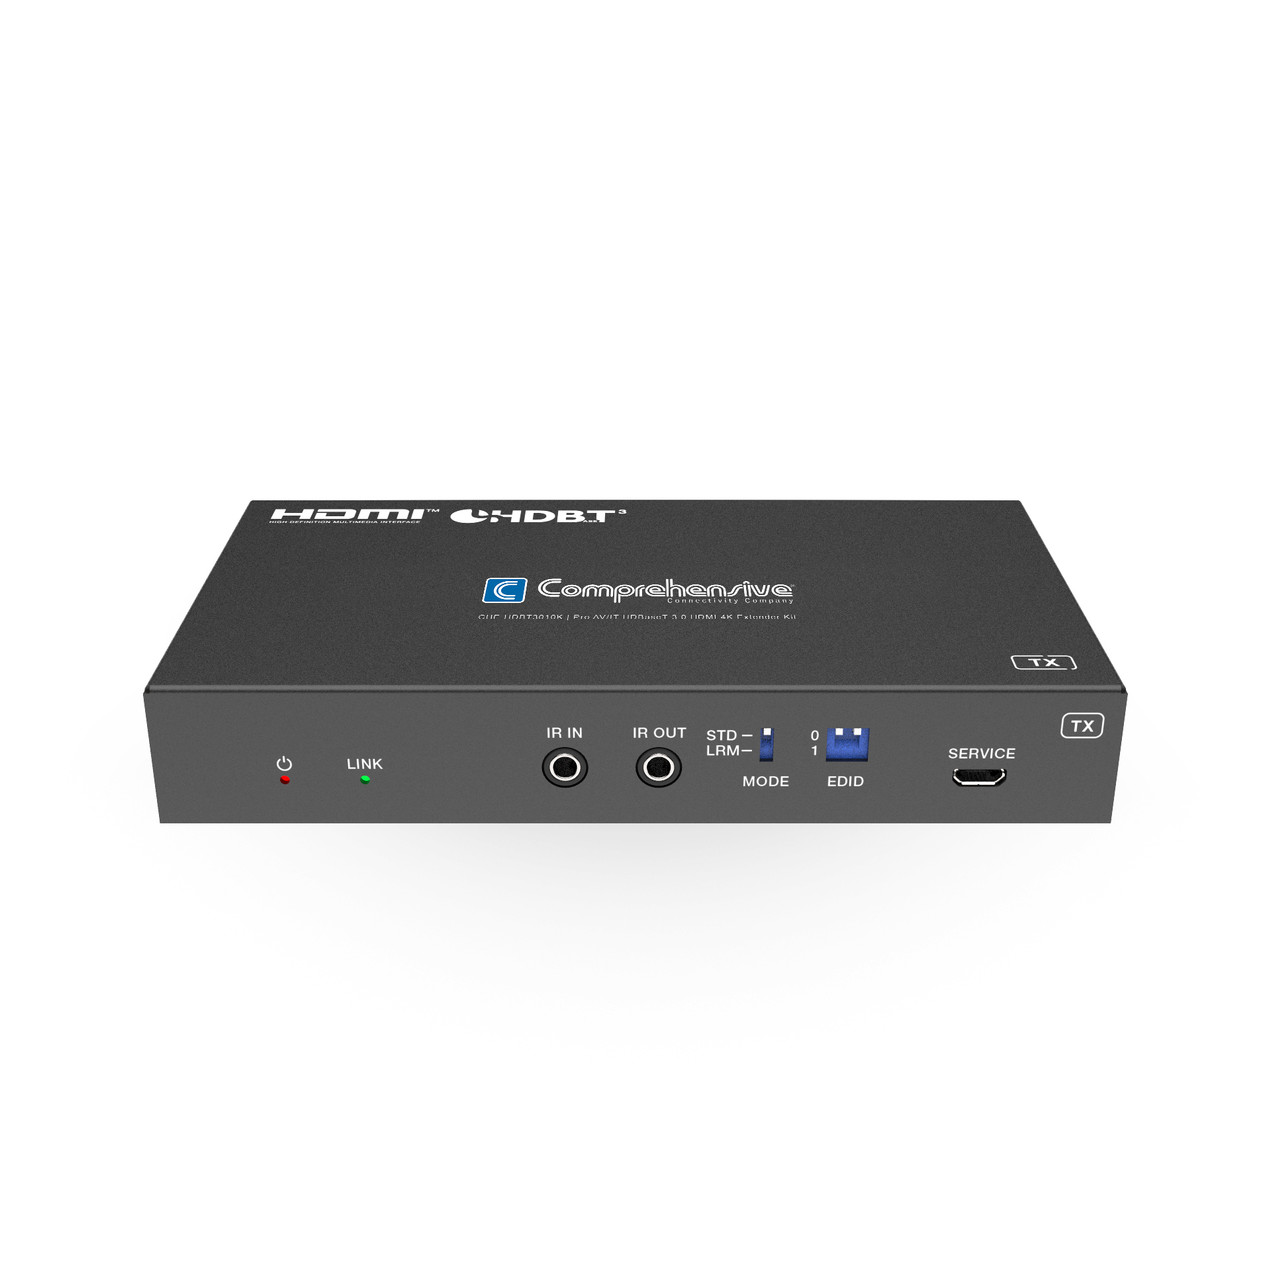 Pro AV/IT HDBaseT™ 4K60 18G HDMI Extender Kit with Audio, RS232, IR, PoC up  to 492ft